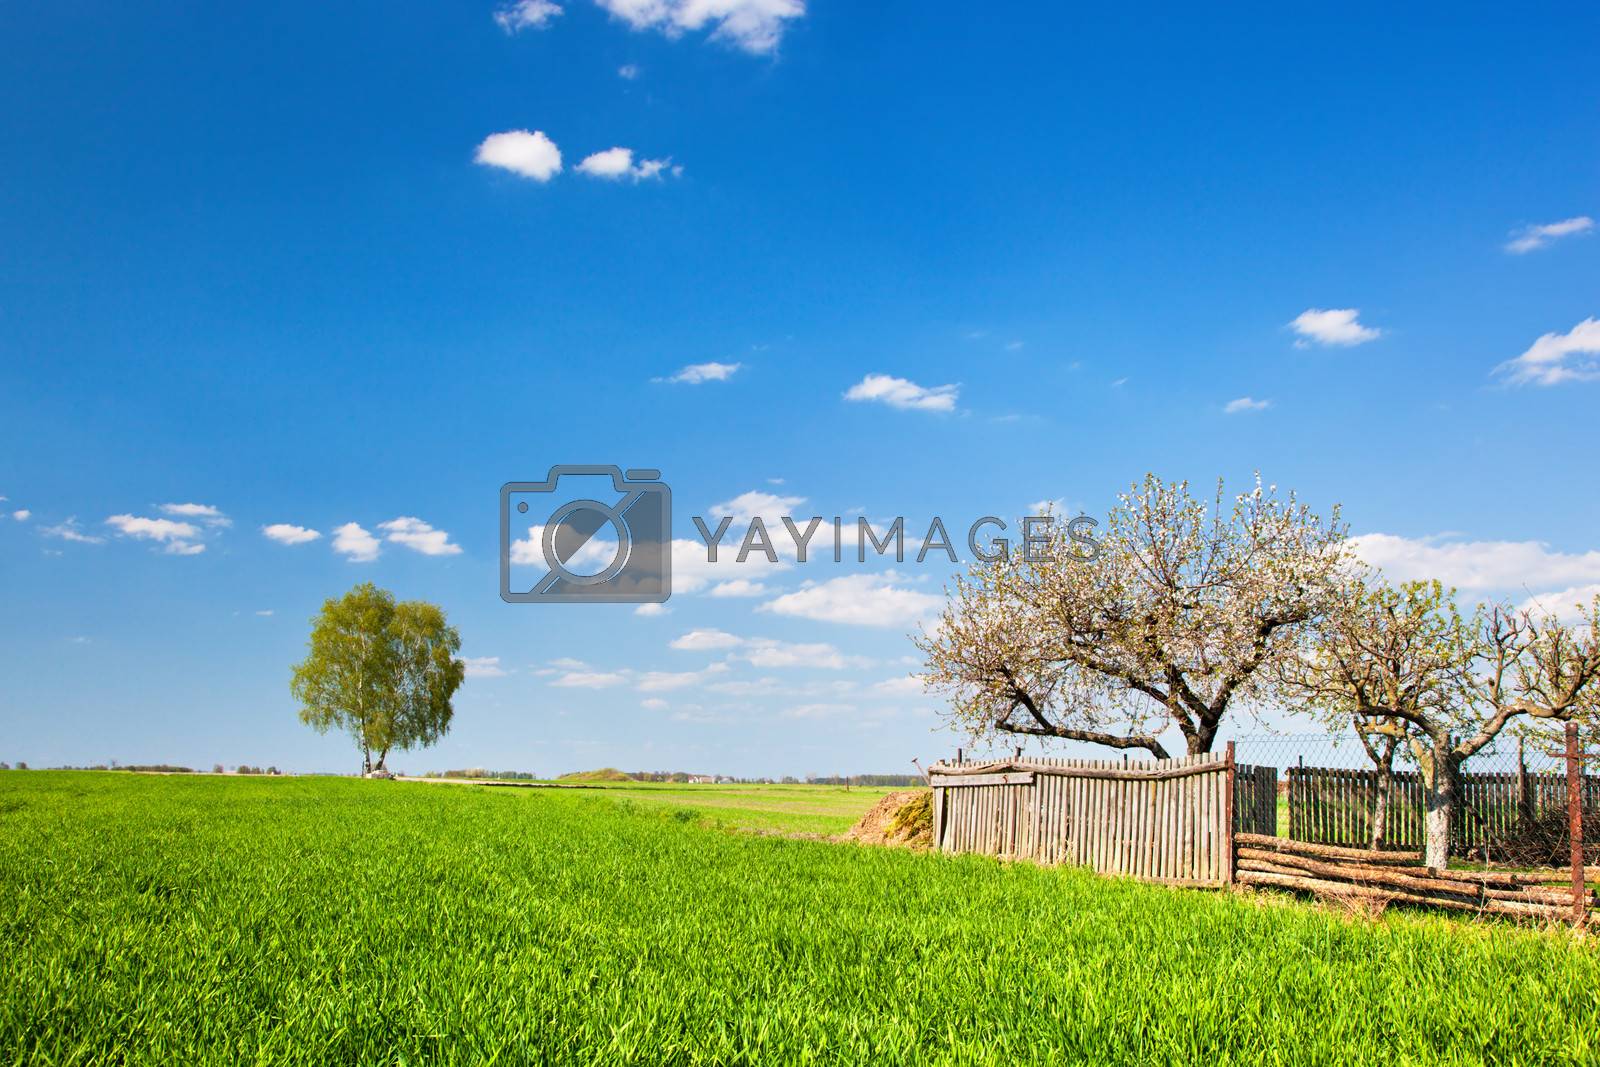 Countryside landscape during spring. Grassy field with trees and wooden fence